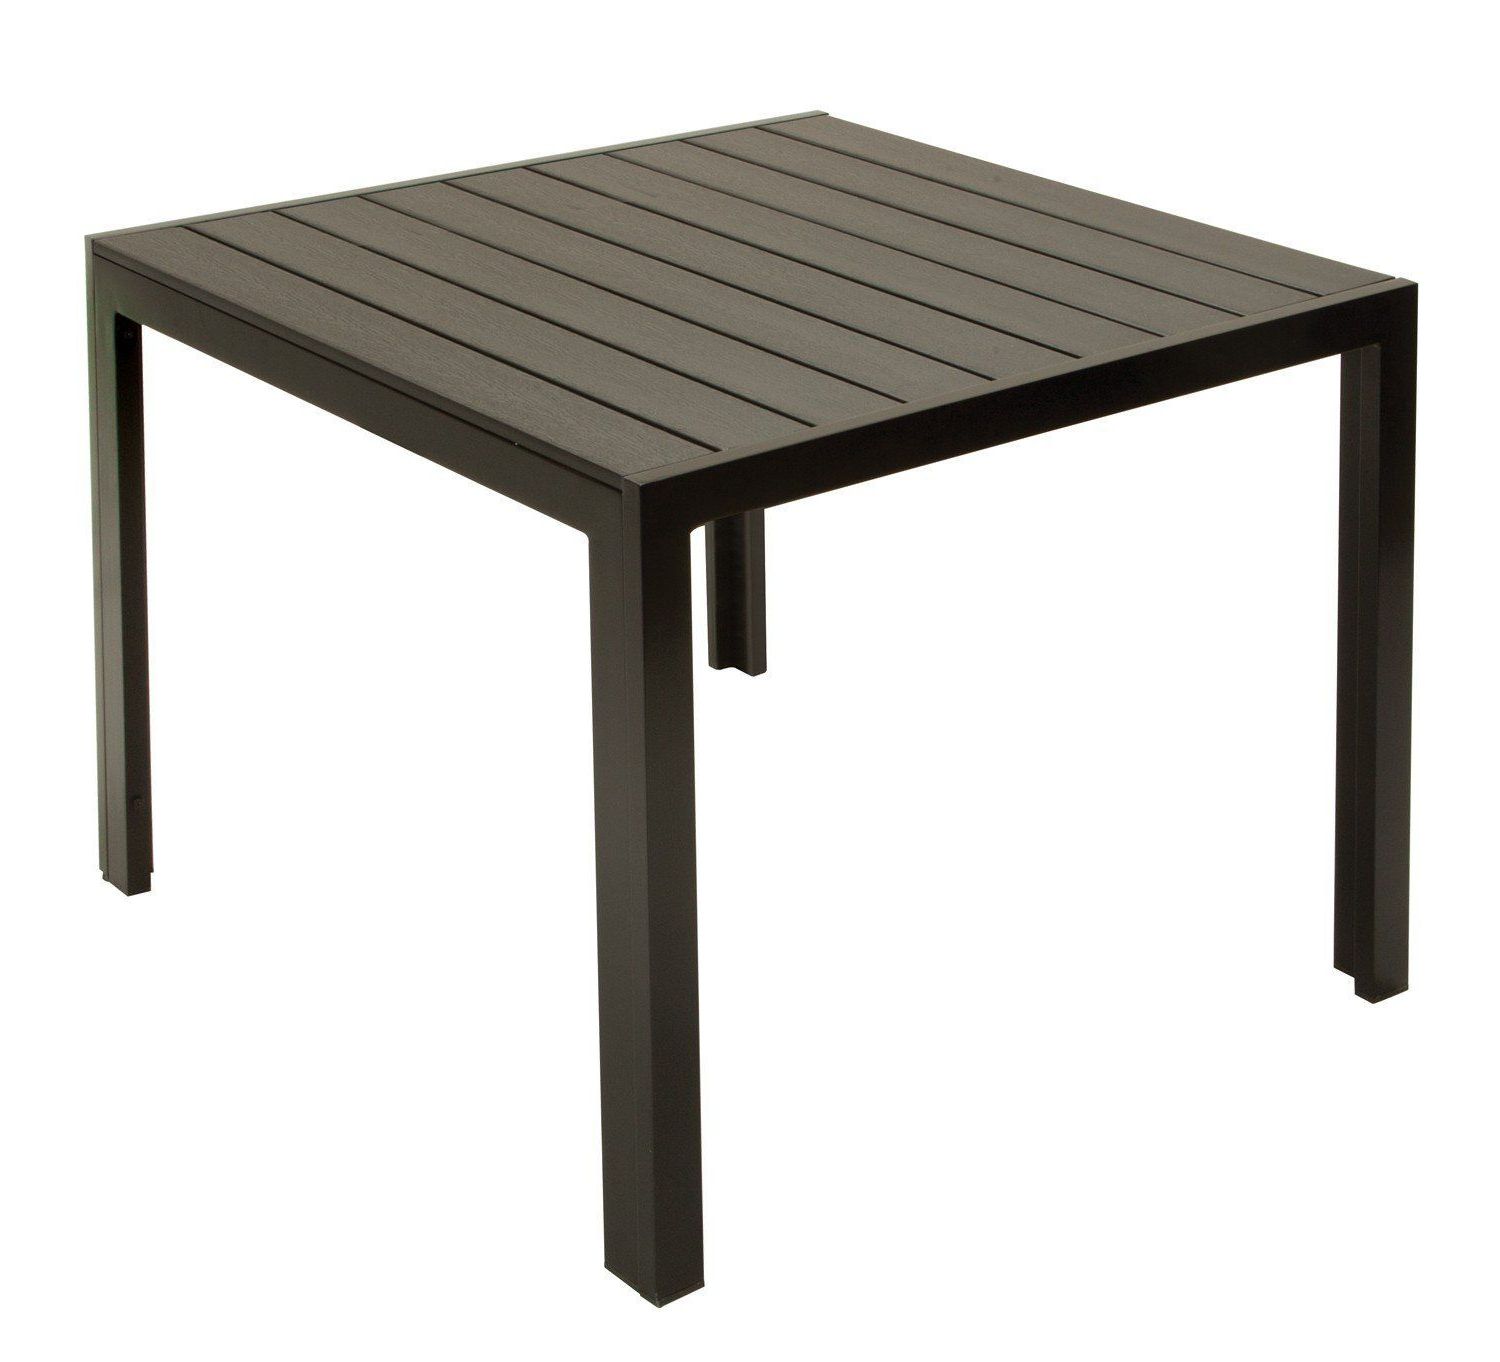 2020 Amazon: Cosco Outdoor Resin Slat, Square Dining Table For Akitomo  (View 1 of 20)